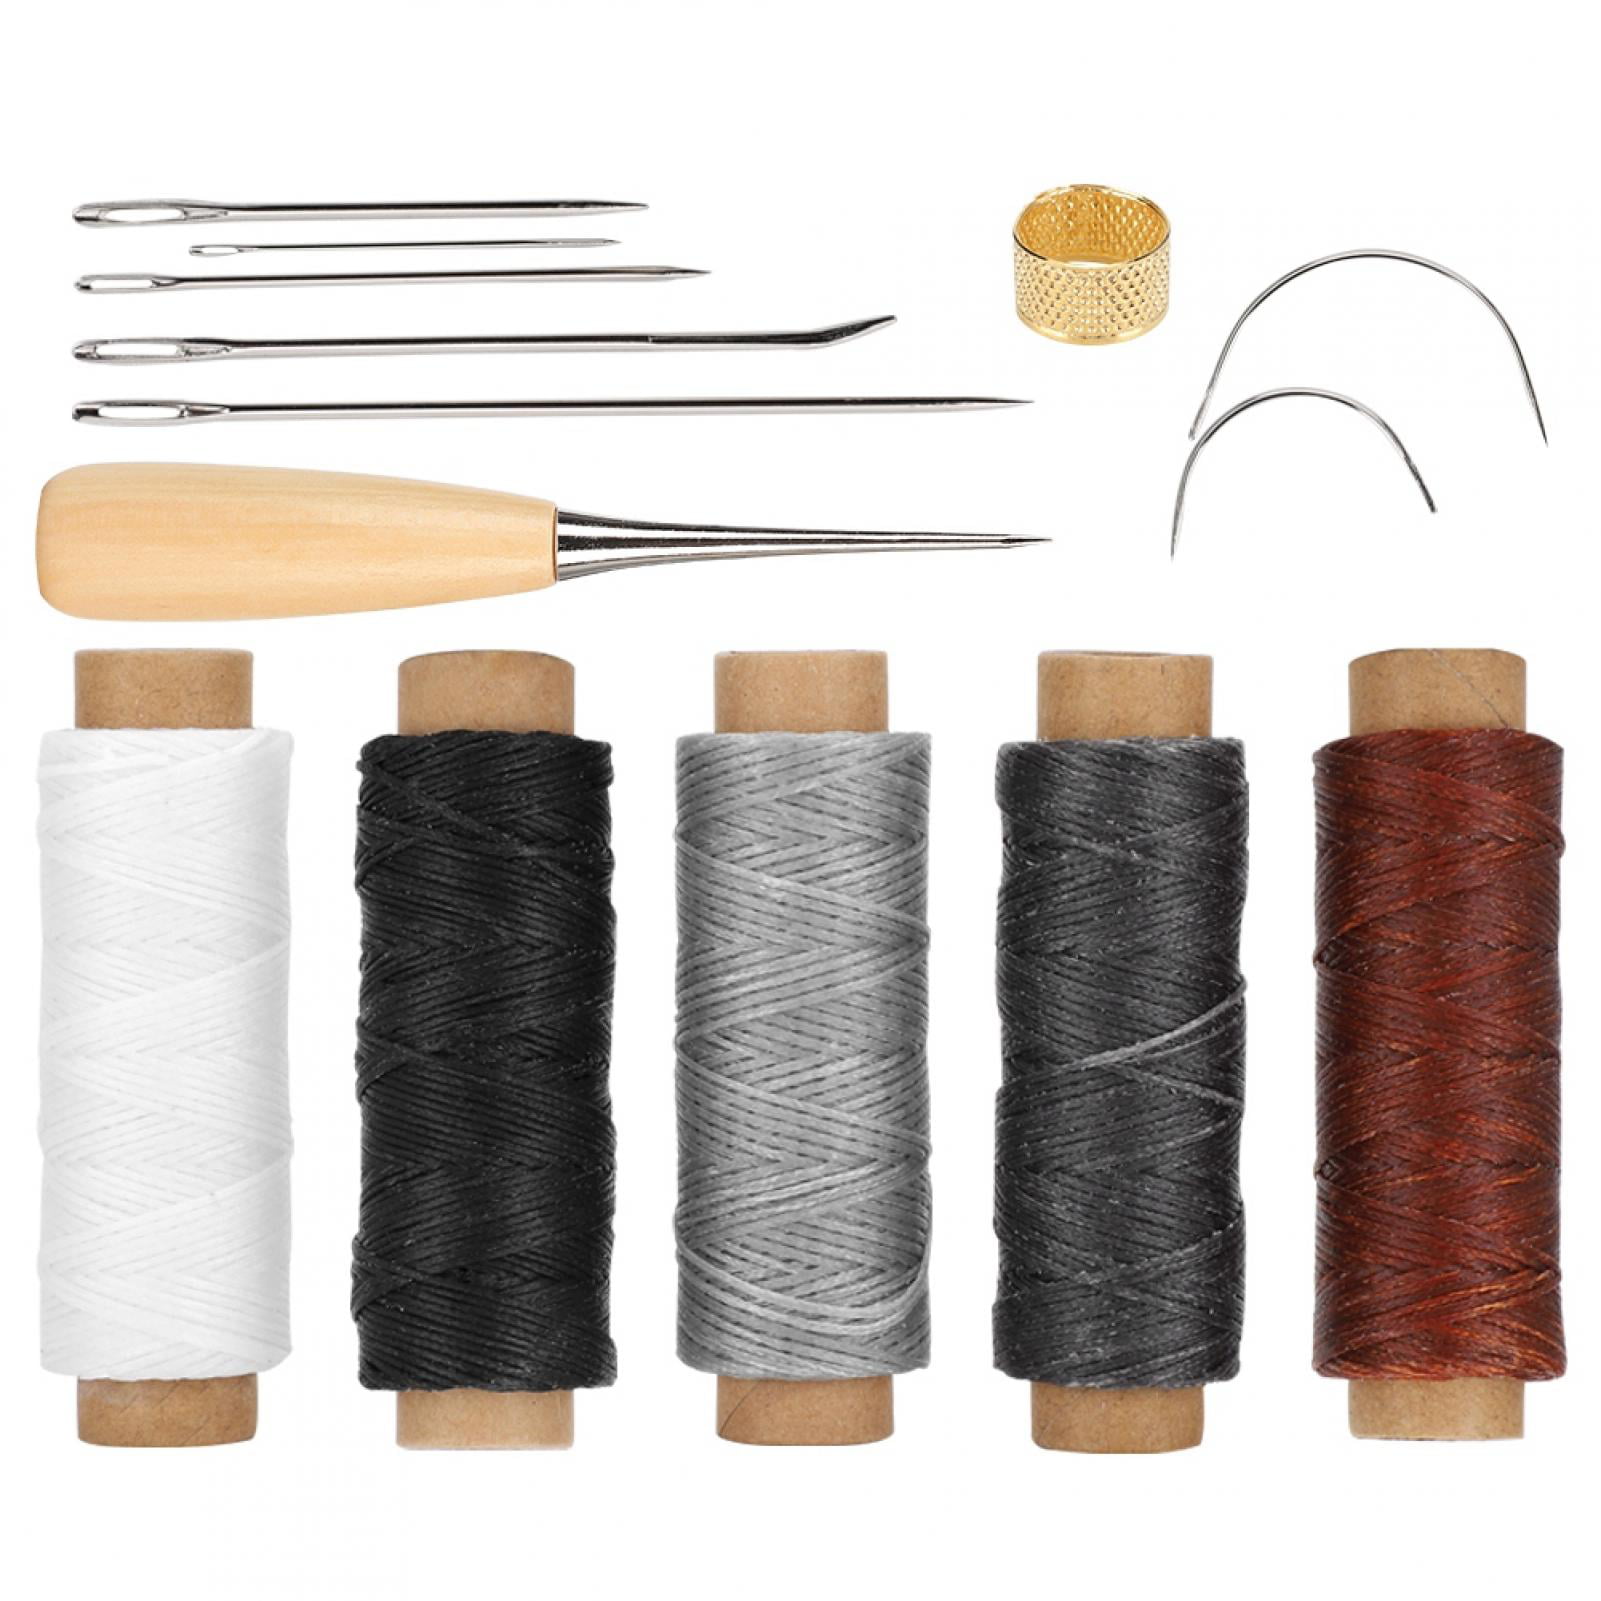 7Pcs Leather Craft Hand Stitching Sewing Tool Thread Awl Waxed Thimble Kit LC 